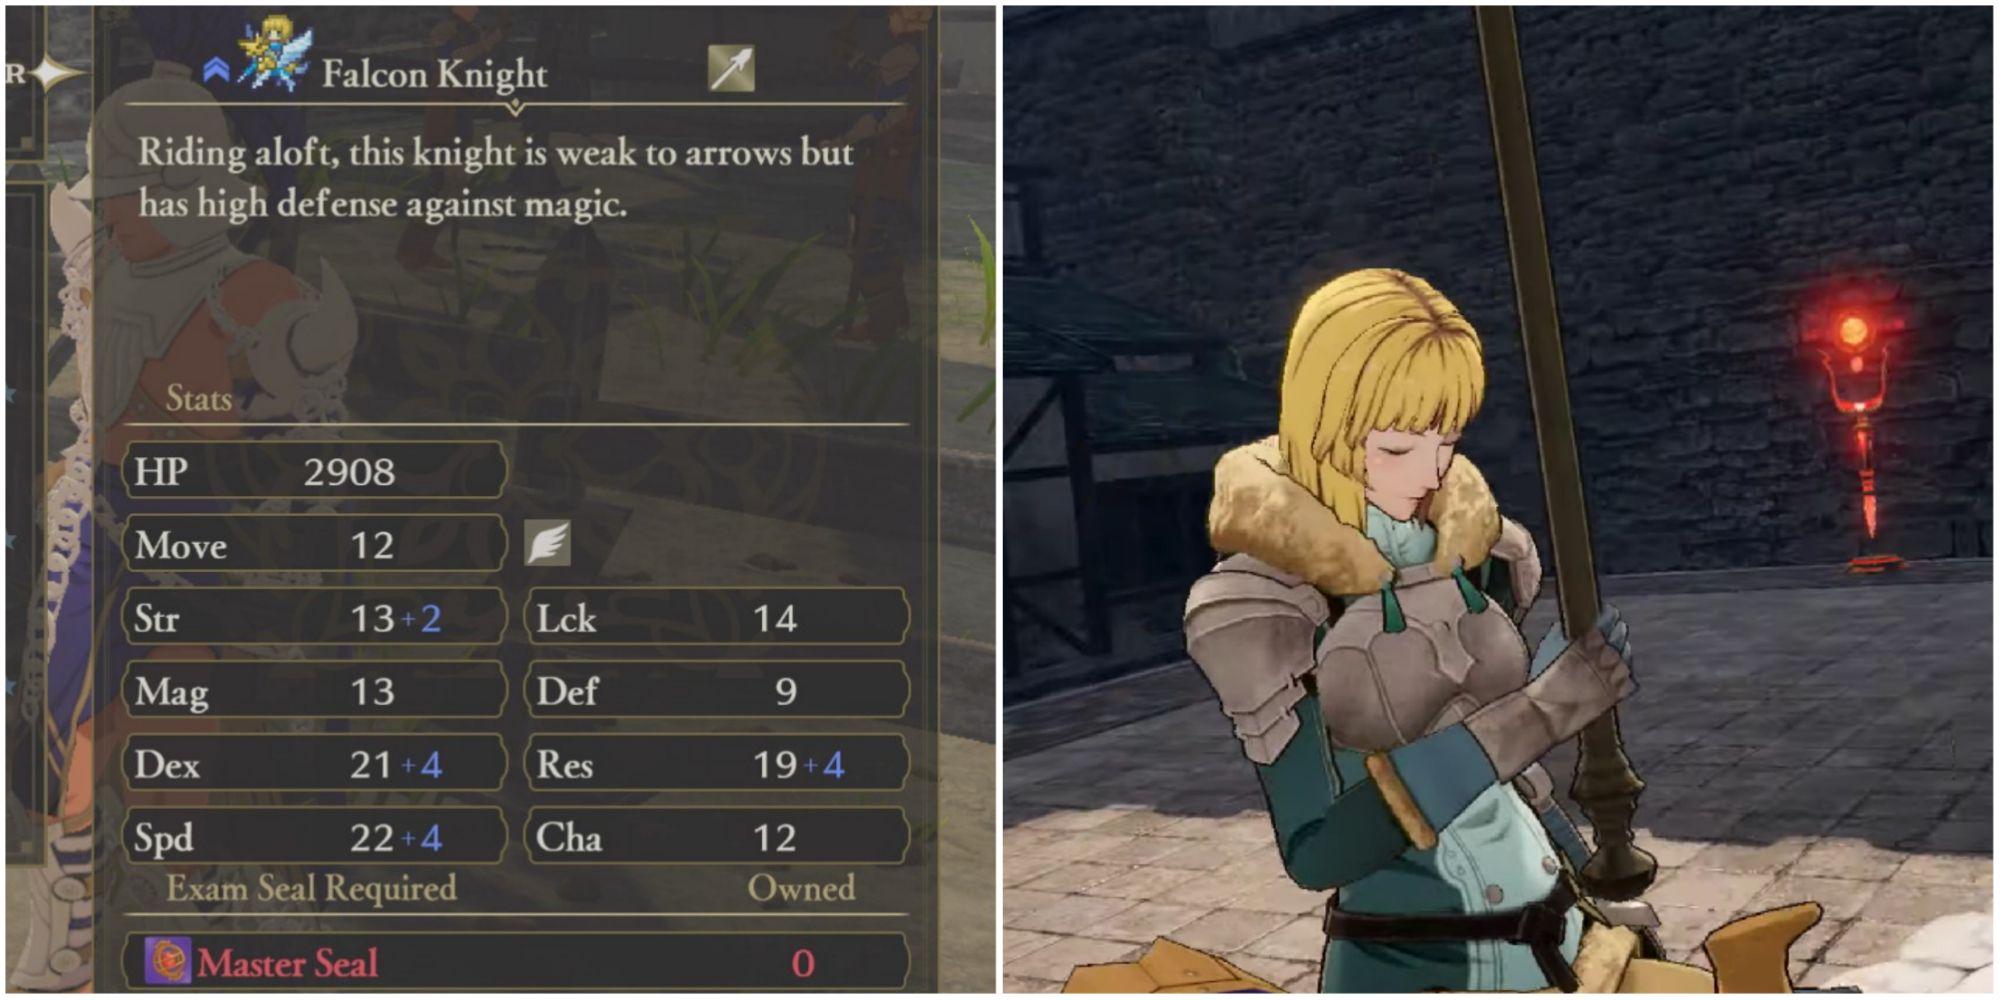 Split image of Falcon Knight stat screen and Ingrid holding lance